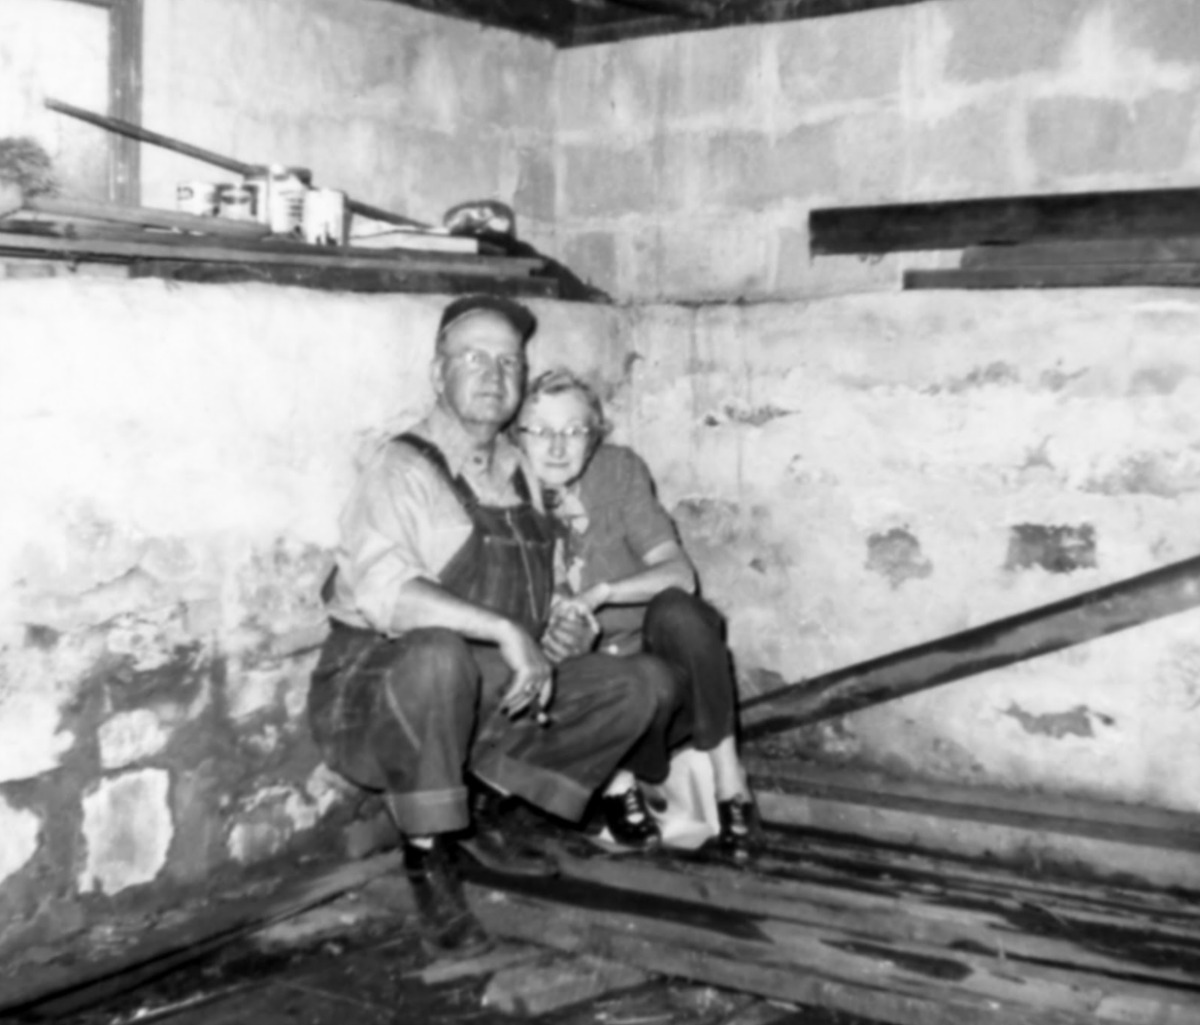 Roy and Thelma Lynn survived the Ruskin Heights tornado in an underground space beneath their garage. When they climbed out, they realized only their 1955 Oldsmobile (see the previous photo) was spared and they began driving around Martin City to help other survivors.